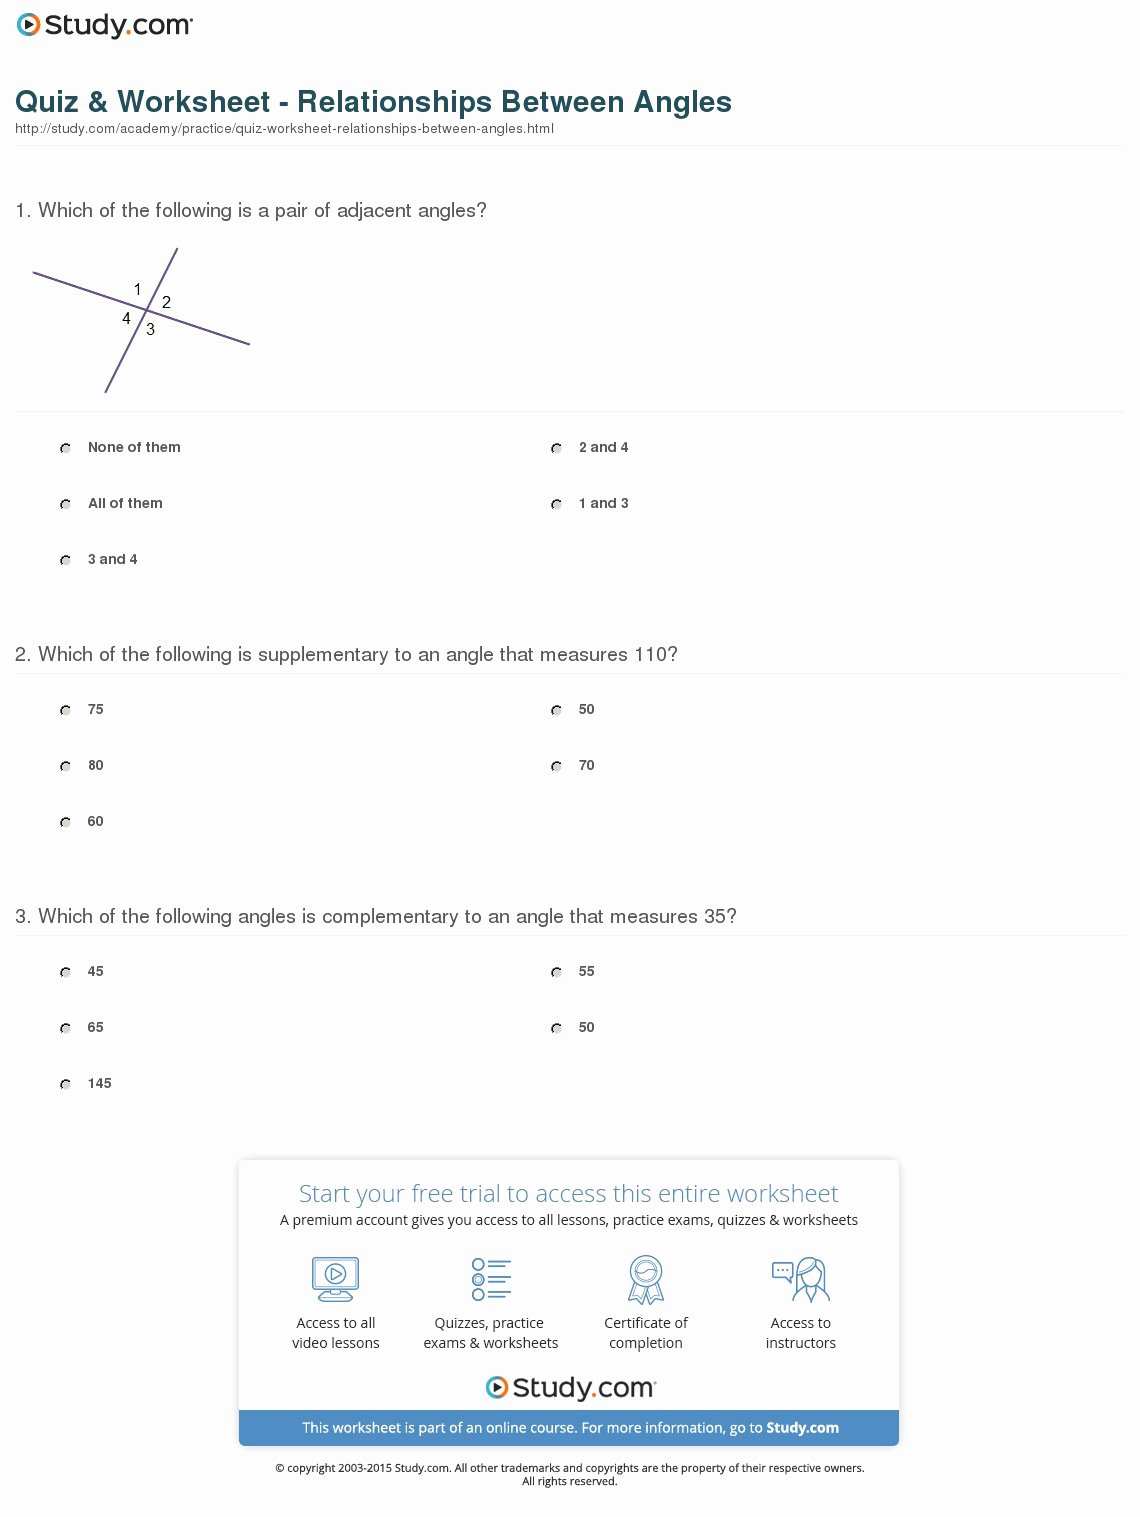 Angle Pair Relationships Practice Worksheet Fresh Quiz &amp; Worksheet Relationships Between Angles